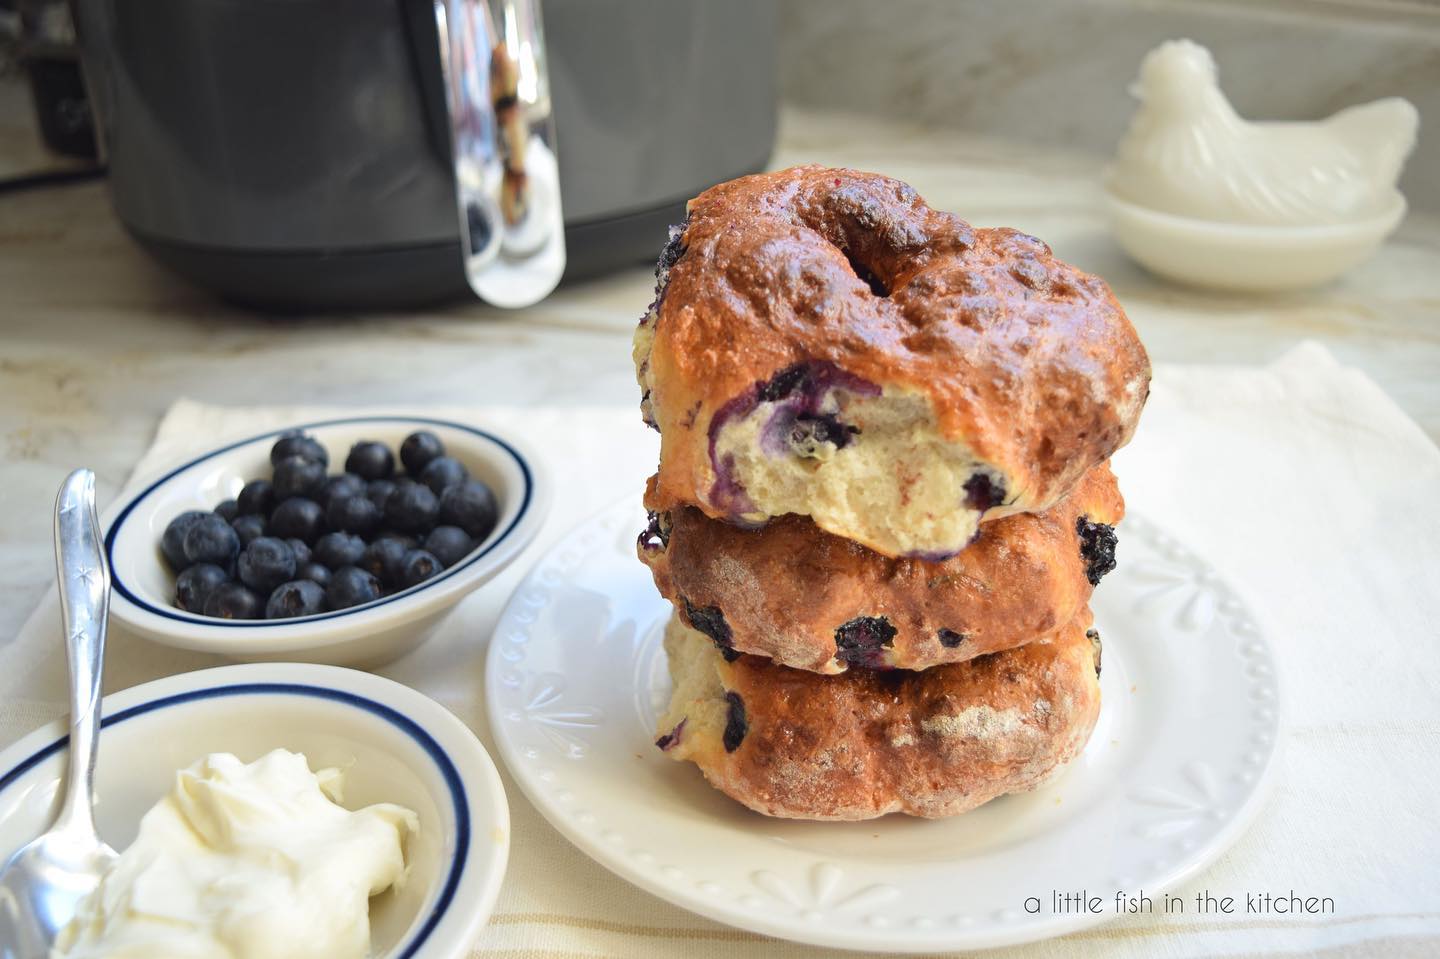 These easy Air Fryer Blueberry Bagels will be perfect to serve for a relaxed weekend breakfast! I’ll show you how to make them in my latest video! Link to the video is in my bio! #blueberrybagel #airfryerrecipes #airfryerbaking #weightwatchers #breakfastideas #breakfastlover #breakfastgram #foodporn #freshbaked